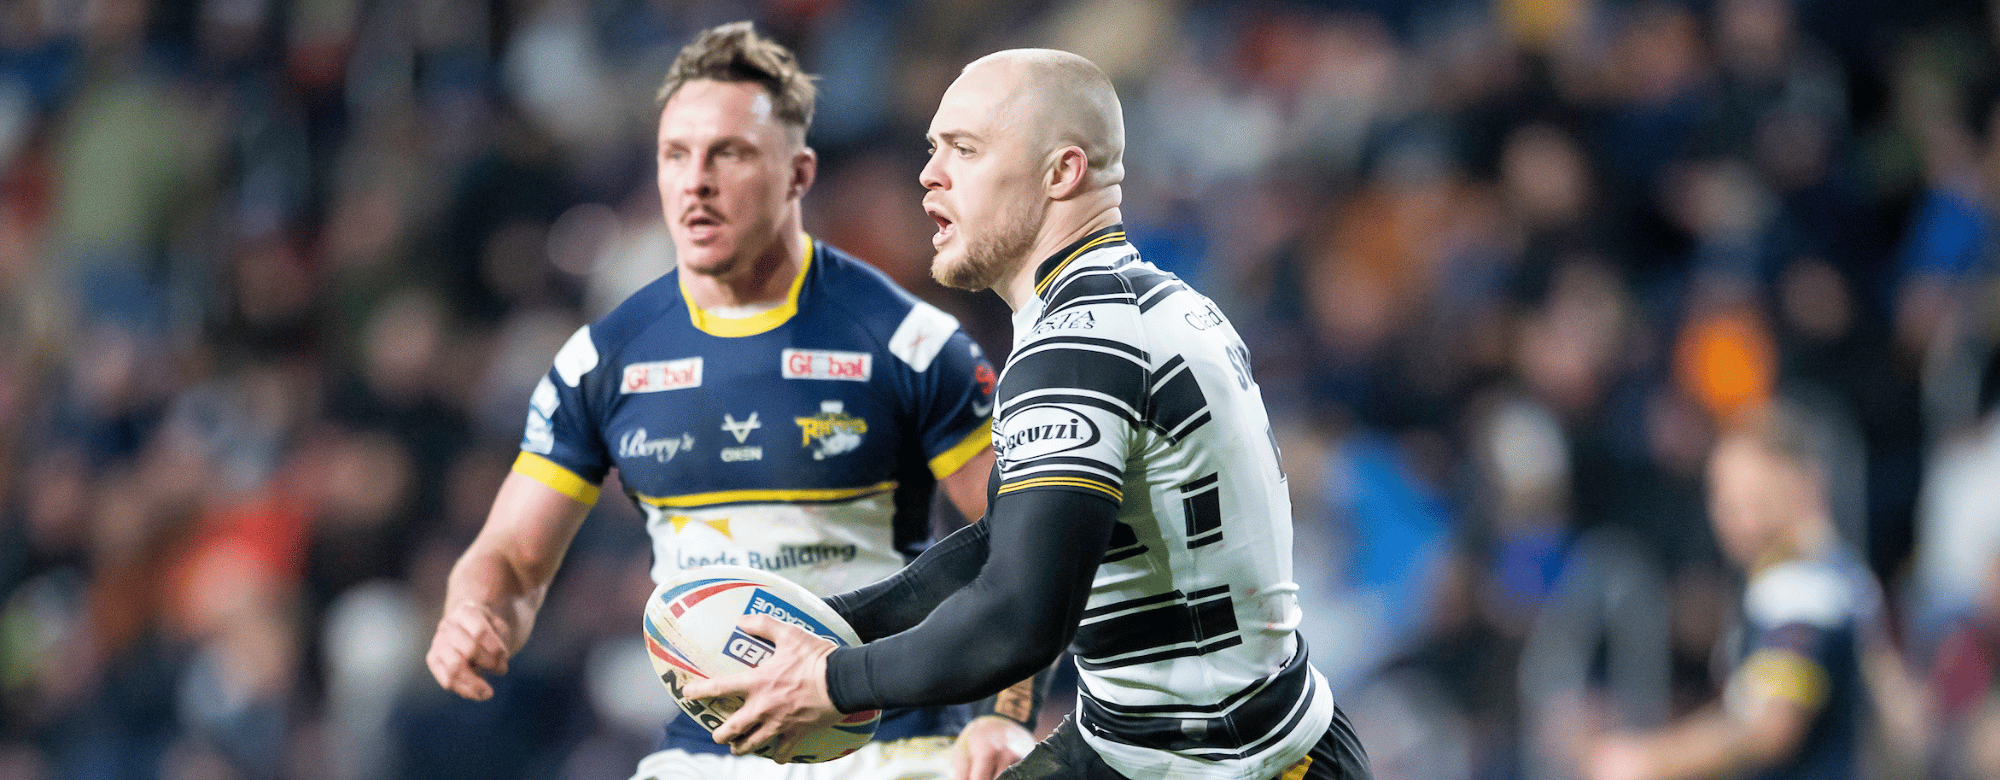 Tickets For Penultimate Home League Fixture Against Rhinos On Sale